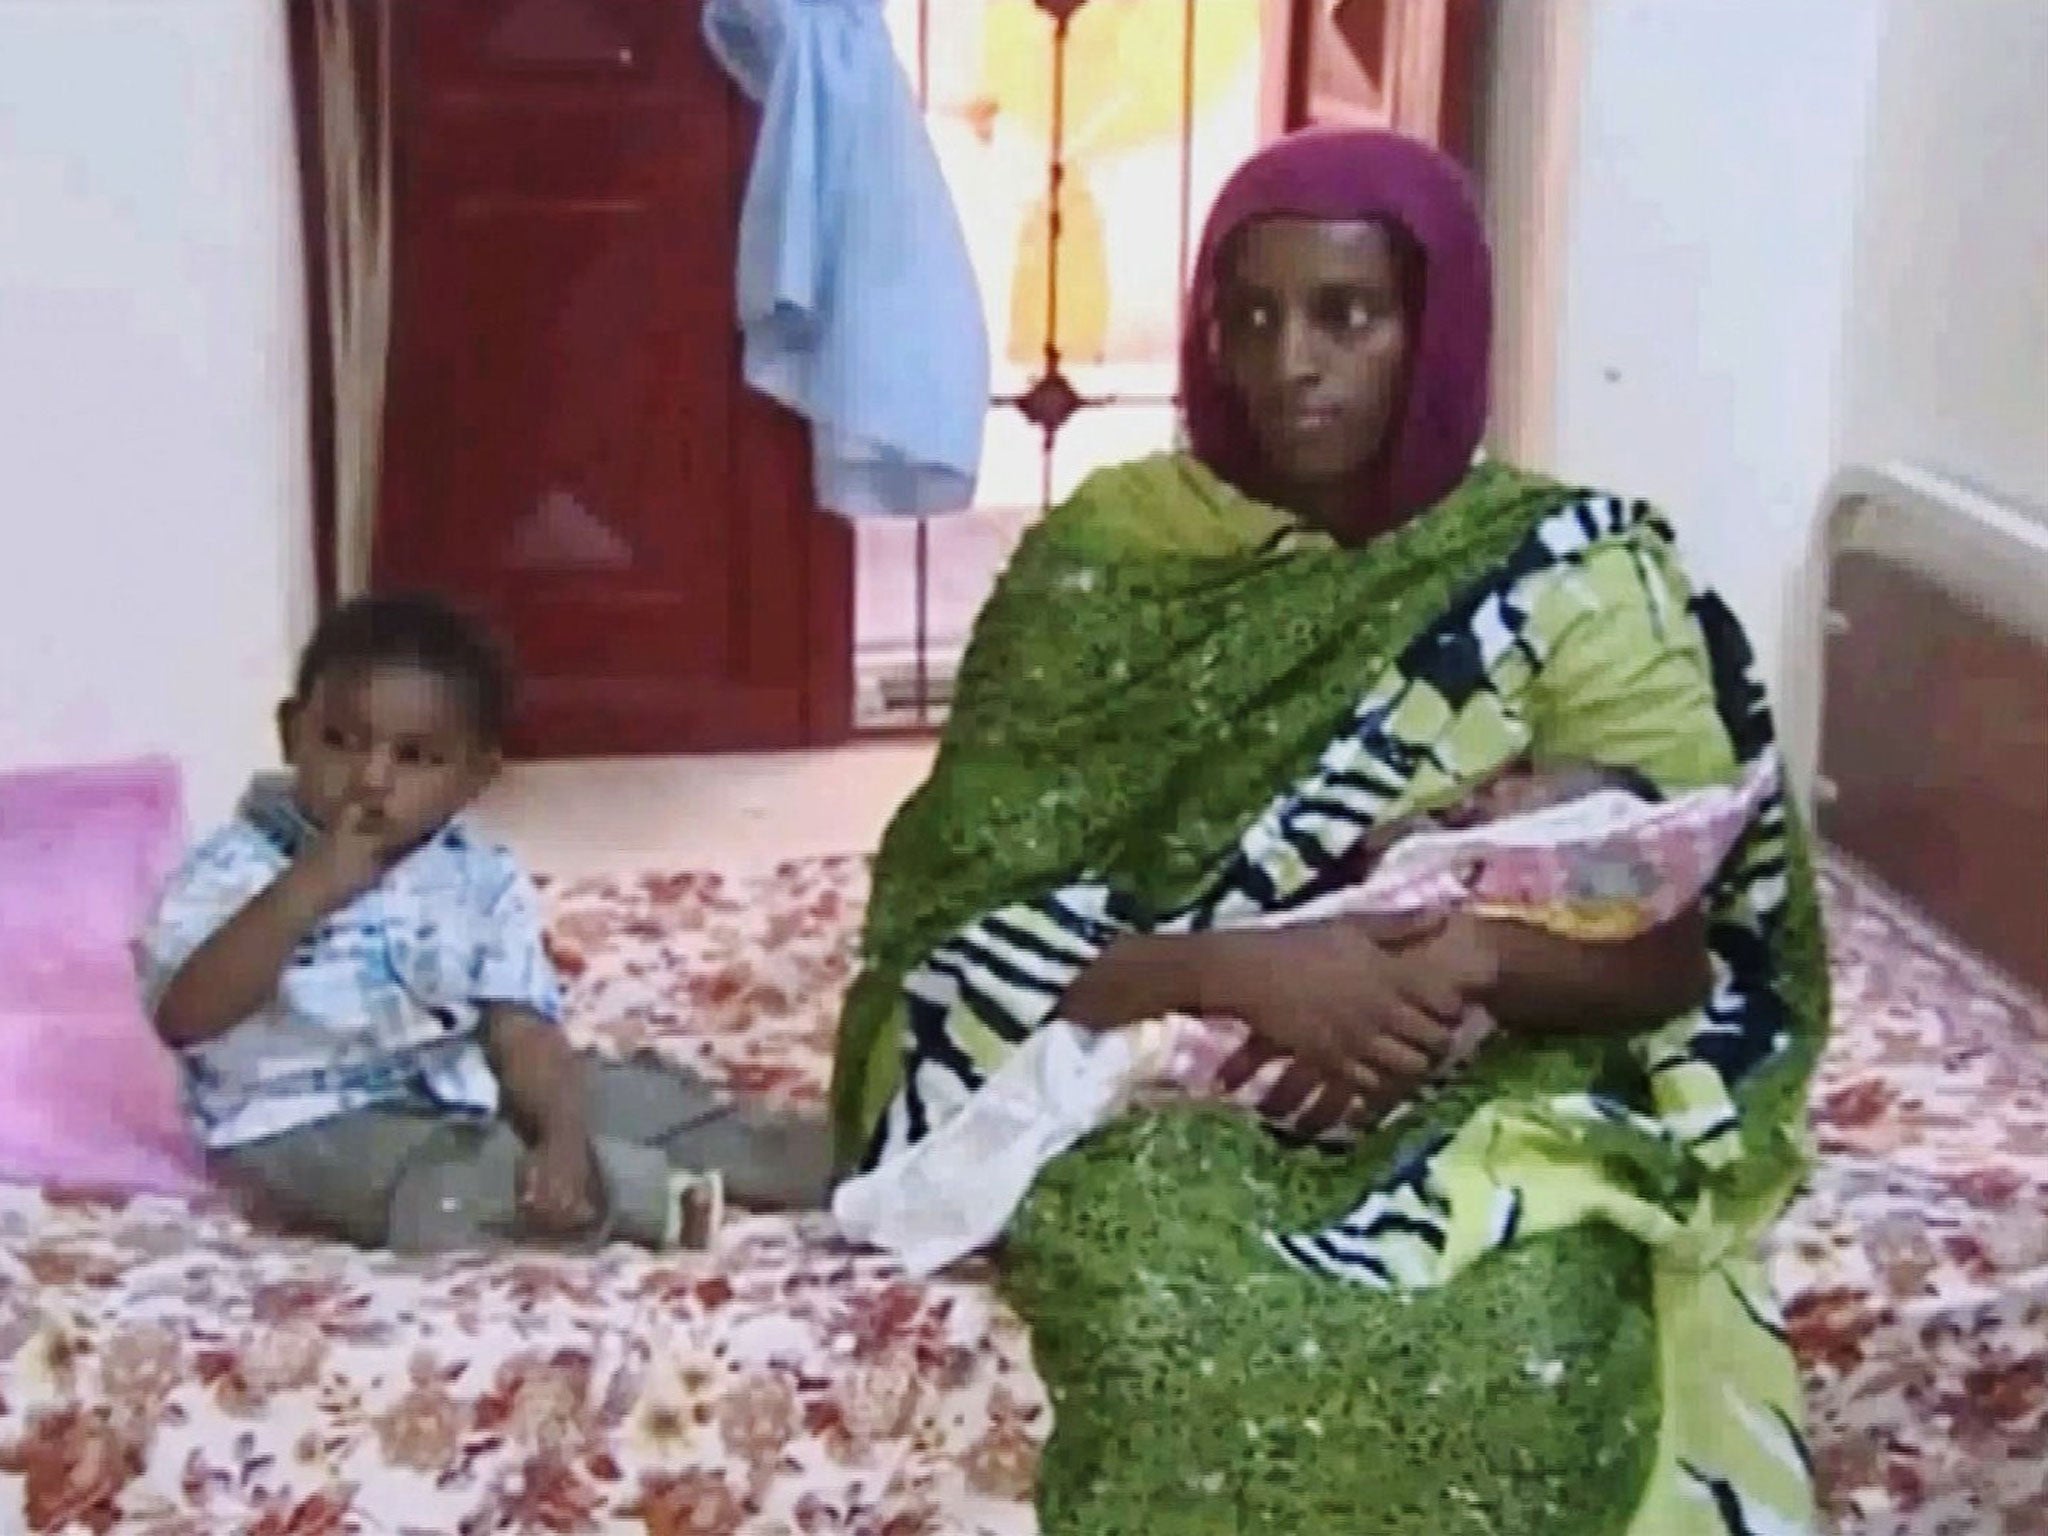 In this file image from an undated video Meriam Ibrahim, sitting next to her 18-month-old son Martin, holds her newborn baby girl as an NGO visits her in a room at a prison in Khartoum